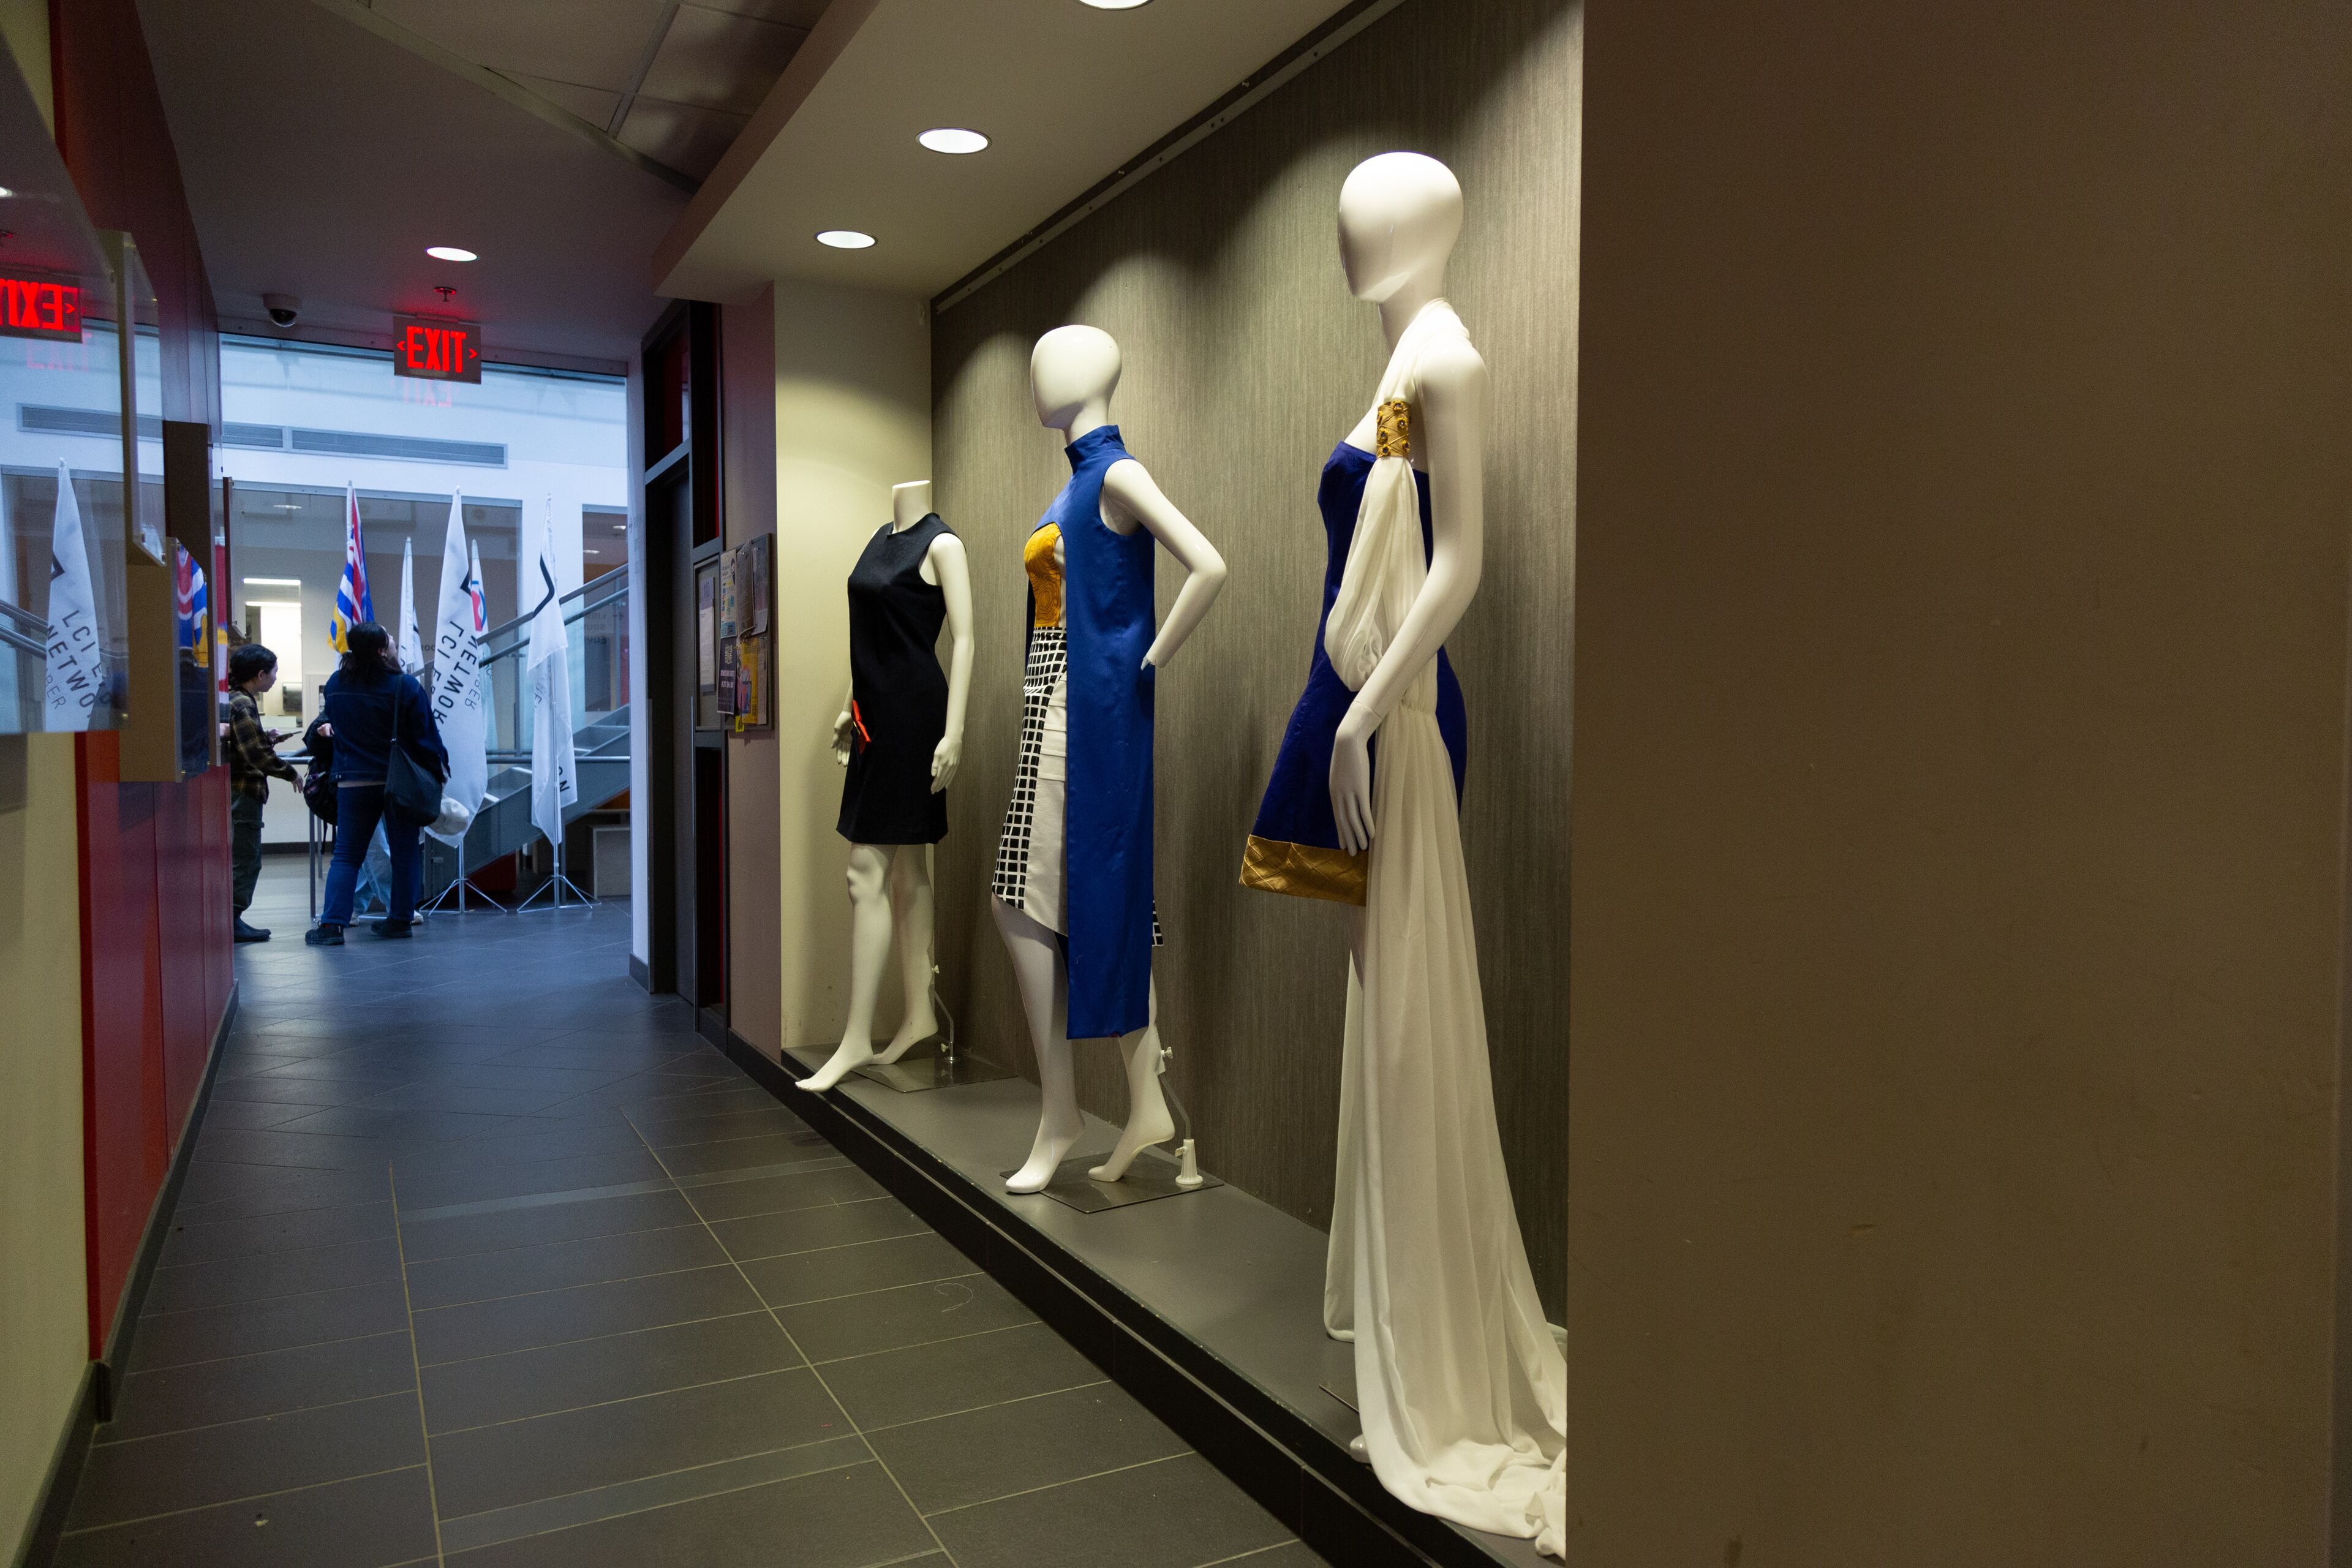 A lineup of mannequins presenting evening dresses as part of a fashion exhibition in a college corridor.